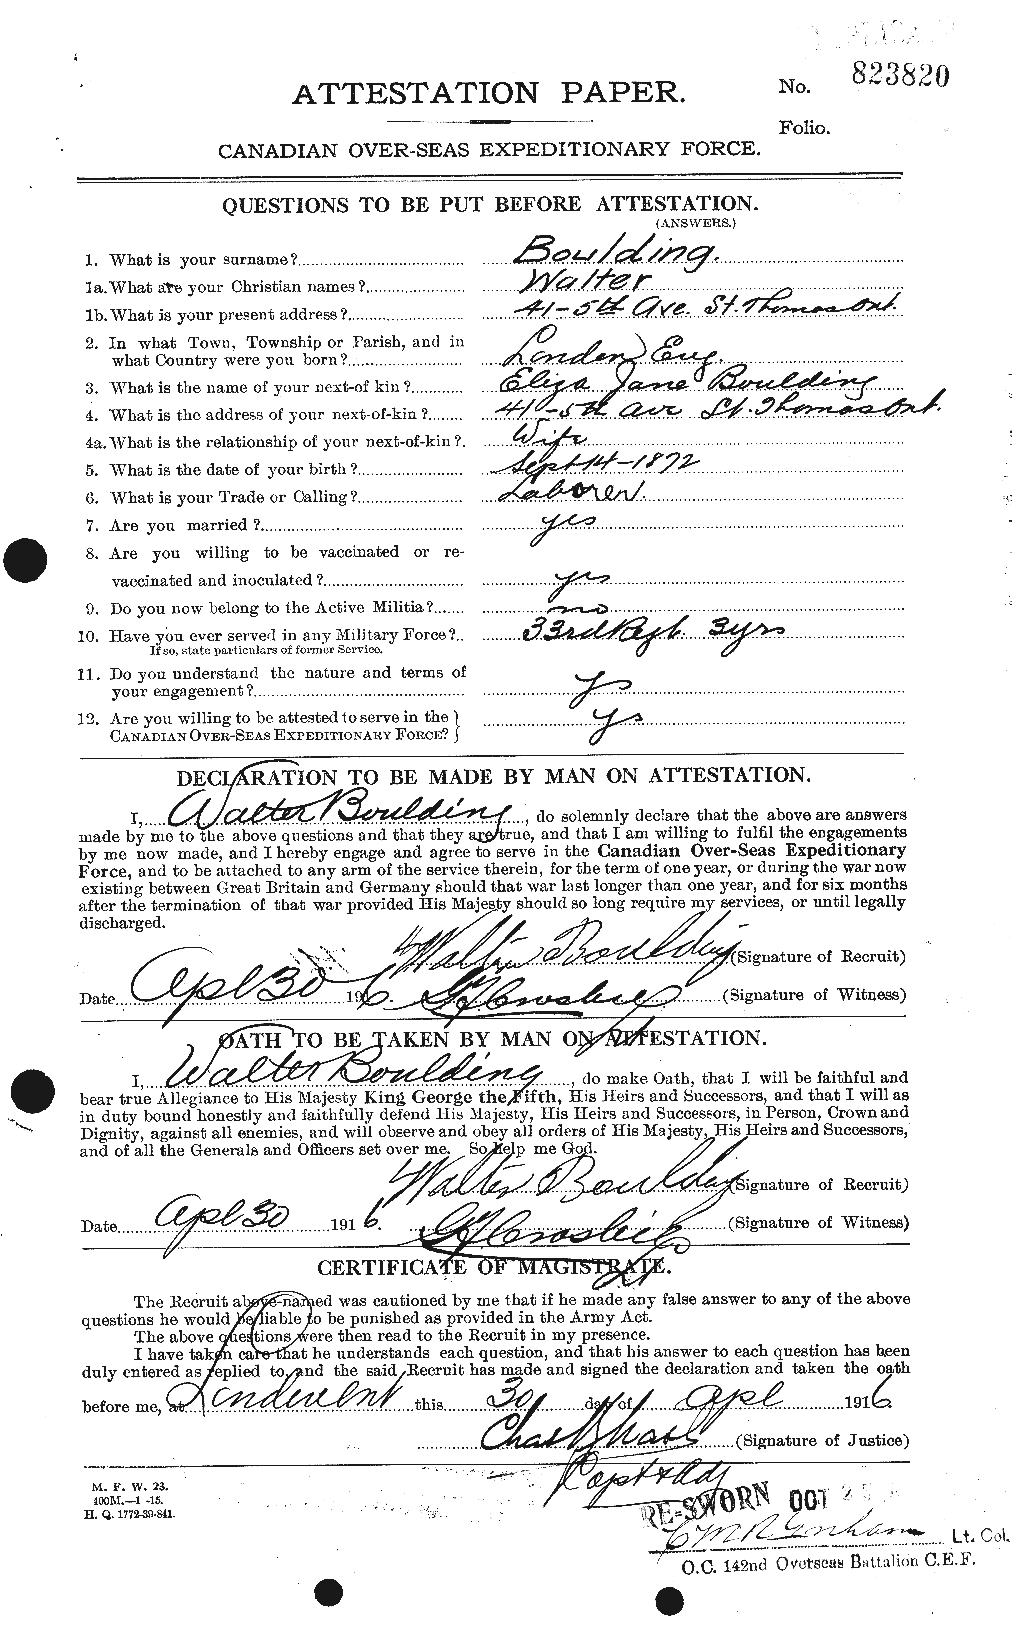 Personnel Records of the First World War - CEF 252906a